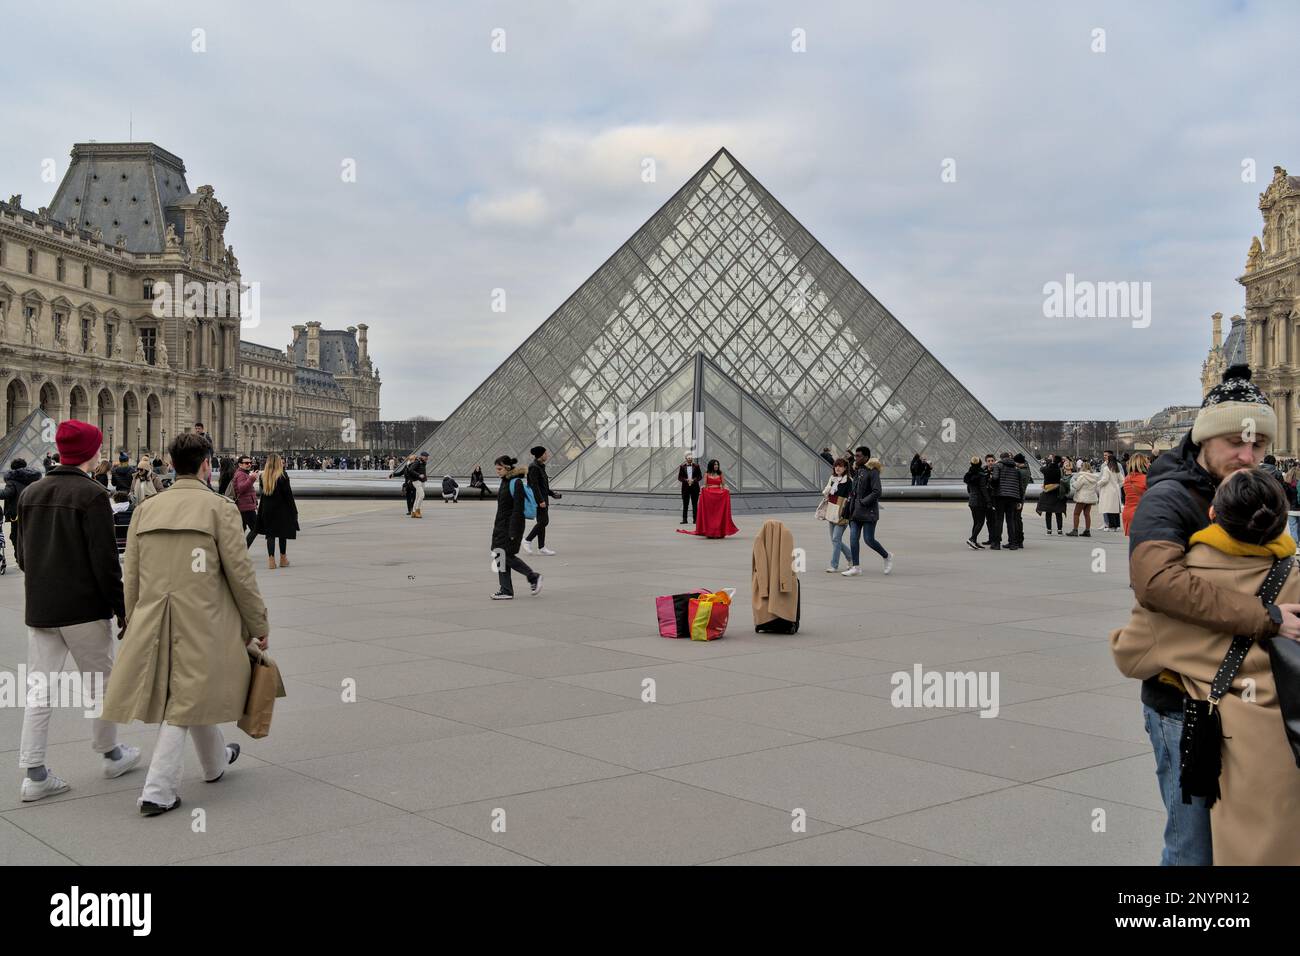 Unknown couple eem to be getting ready for a photoshoot dressed formally in front of the pyramid of the louvre in the winter. Paris Stock Photo